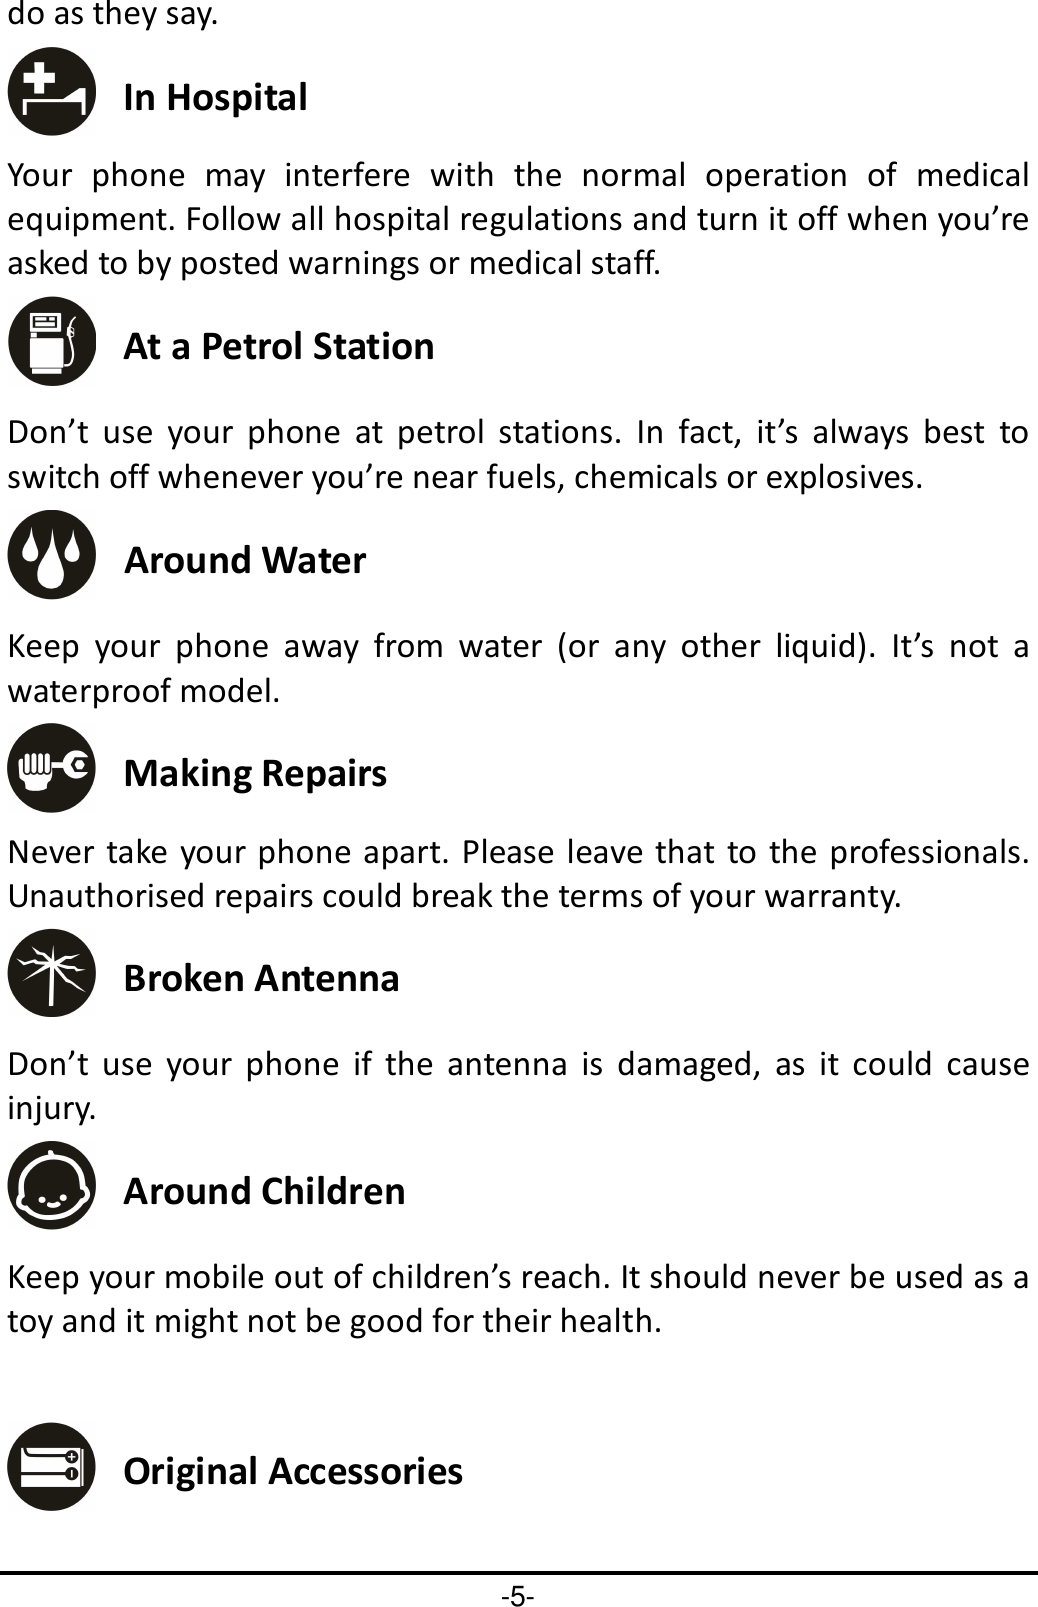 -5- do as they say.  In Hospital Your  phone  may  interfere  with  the  normal  operation  of  medical equipment. Follow all hospital regulations and turn it off when you’re asked to by posted warnings or medical staff.    At a Petrol Station Don’t  use  your  phone  at  petrol  stations.  In  fact,  it’s  always  best  to switch off whenever you’re near fuels, chemicals or explosives.  Around Water Keep  your  phone  away  from  water  (or  any  other  liquid).  It’s  not  a waterproof model.      Making Repairs Never take your phone apart. Please leave that to the professionals. Unauthorised repairs could break the terms of your warranty.  Broken Antenna Don’t  use  your  phone  if  the  antenna  is  damaged,  as  it  could  cause injury.    Around Children Keep your mobile out of children’s reach. It should never be used as a toy and it might not be good for their health.     Original Accessories 